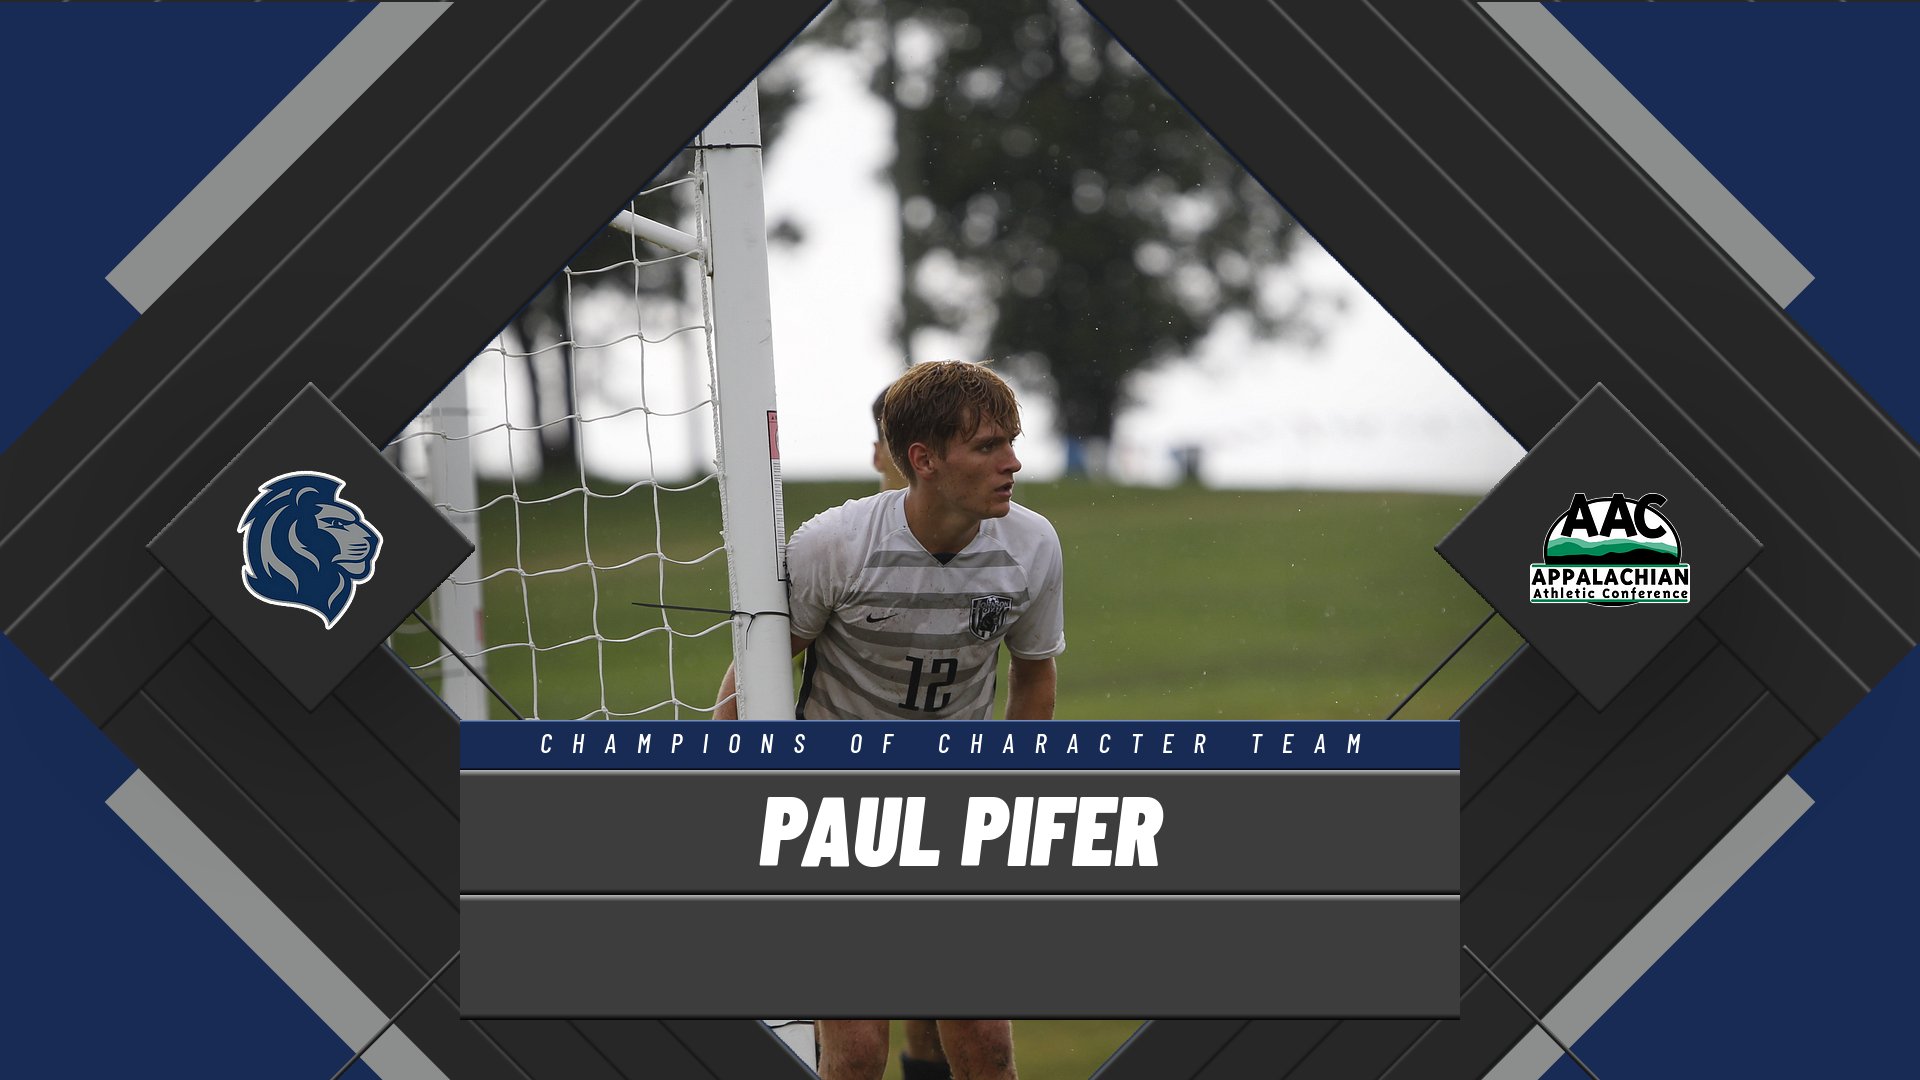 Paul Pifer Named Champions of Character Team Member; 8 Royals Named to All-Academic Team